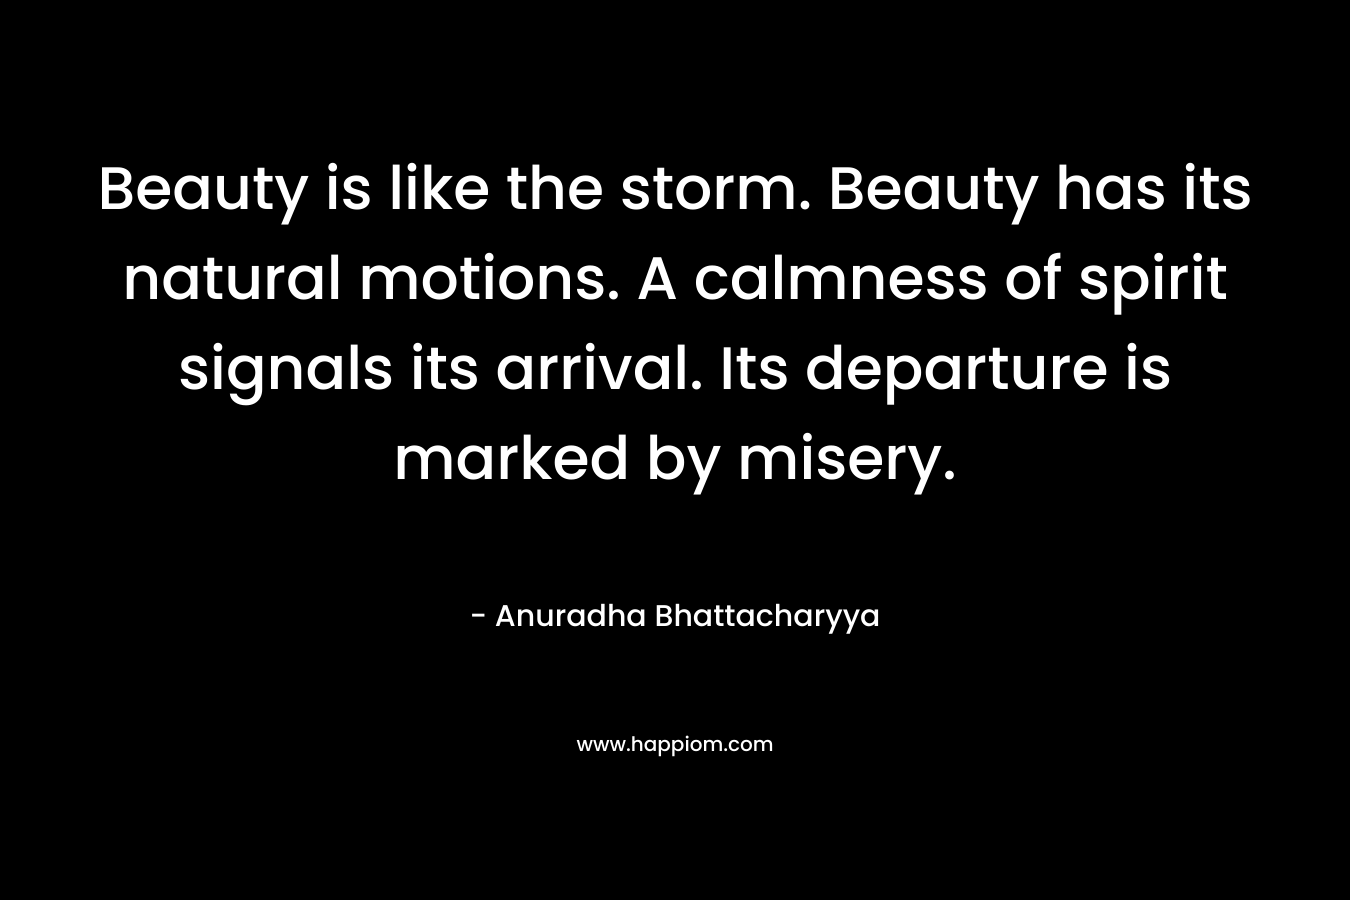 Beauty is like the storm. Beauty has its natural motions. A calmness of spirit signals its arrival. Its departure is marked by misery. – Anuradha Bhattacharyya